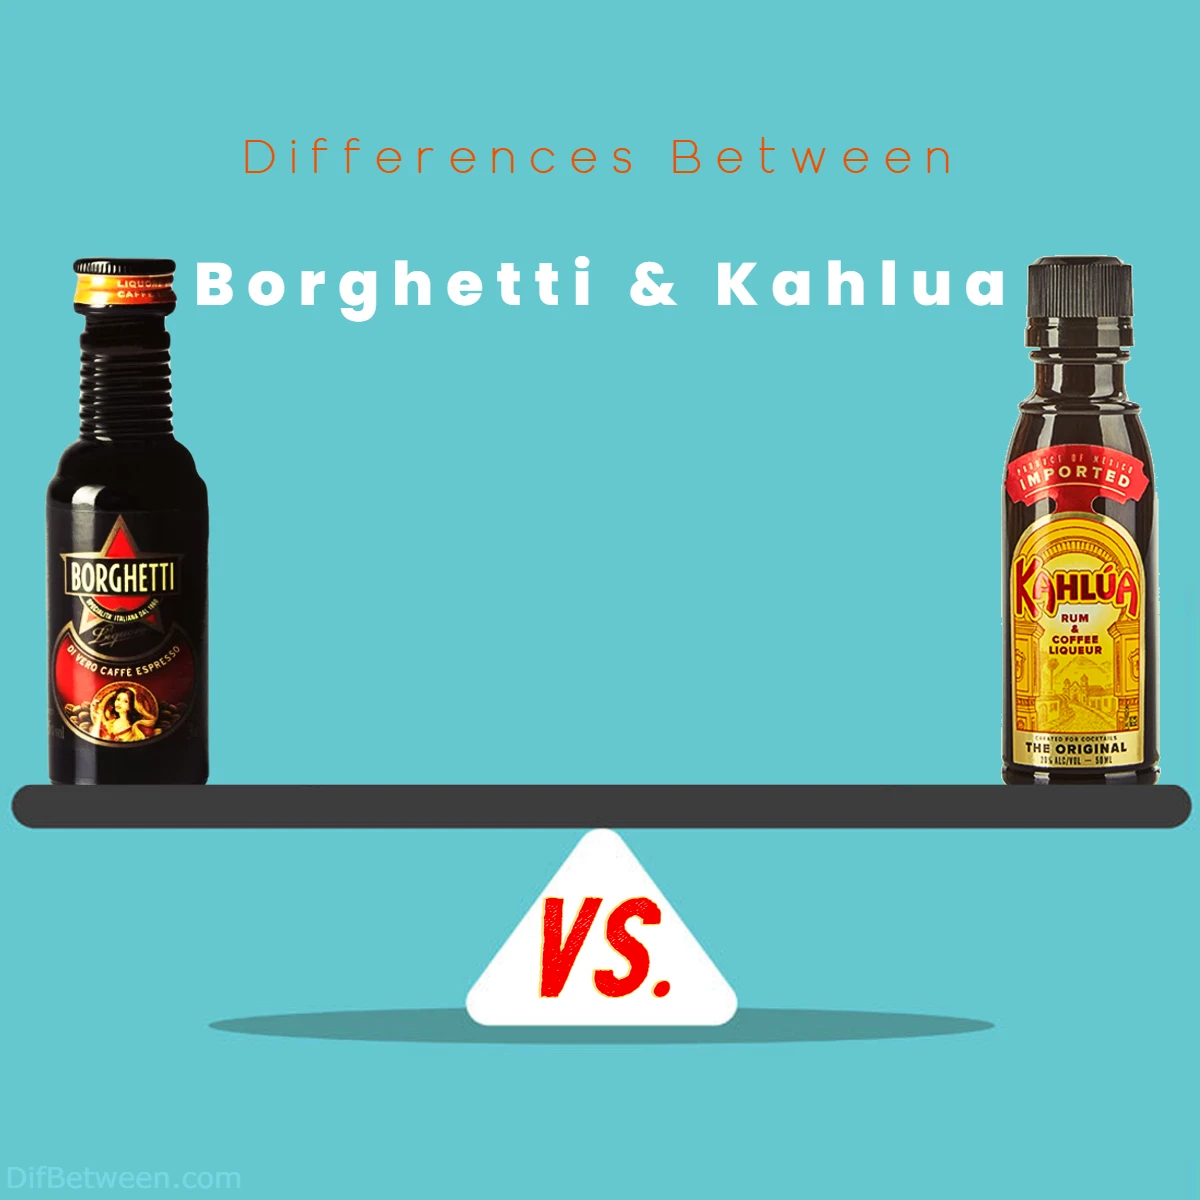 Differences Between Kahlua and Borghetti